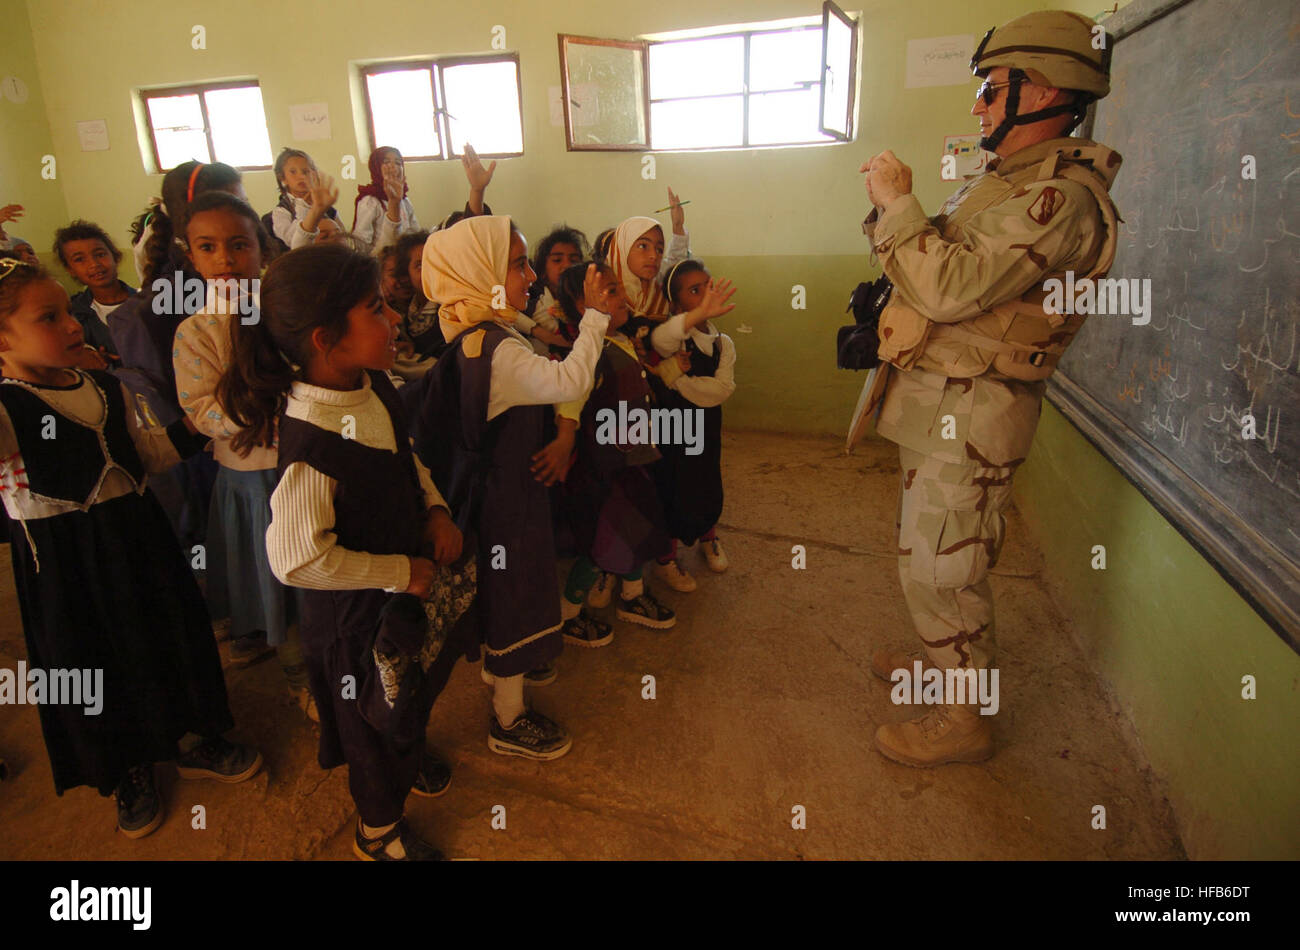 050322-N-5319A-015 U.S. Army Chaplin Tommy Fuller takes a photo of Iraqi school children at the Al Mutnba Primary School located near Camp Kalsu, Iraq, on March 22, 2005.  Members of the155th Brigade Combat Team from Tupelo, Miss., are delivering school supplies under a Fuller-initiated Adopt a School program aboard Camp Kalsu where different units choose a local school and try to connect them with a U.S. school to help with supplies and start a pen pal program.  DoD photo by Petty Officer 1st Class Brien Aho, U.S. Navy.  (Released) Defense.gov News Photo 050322-N-5319A-015 Stock Photo